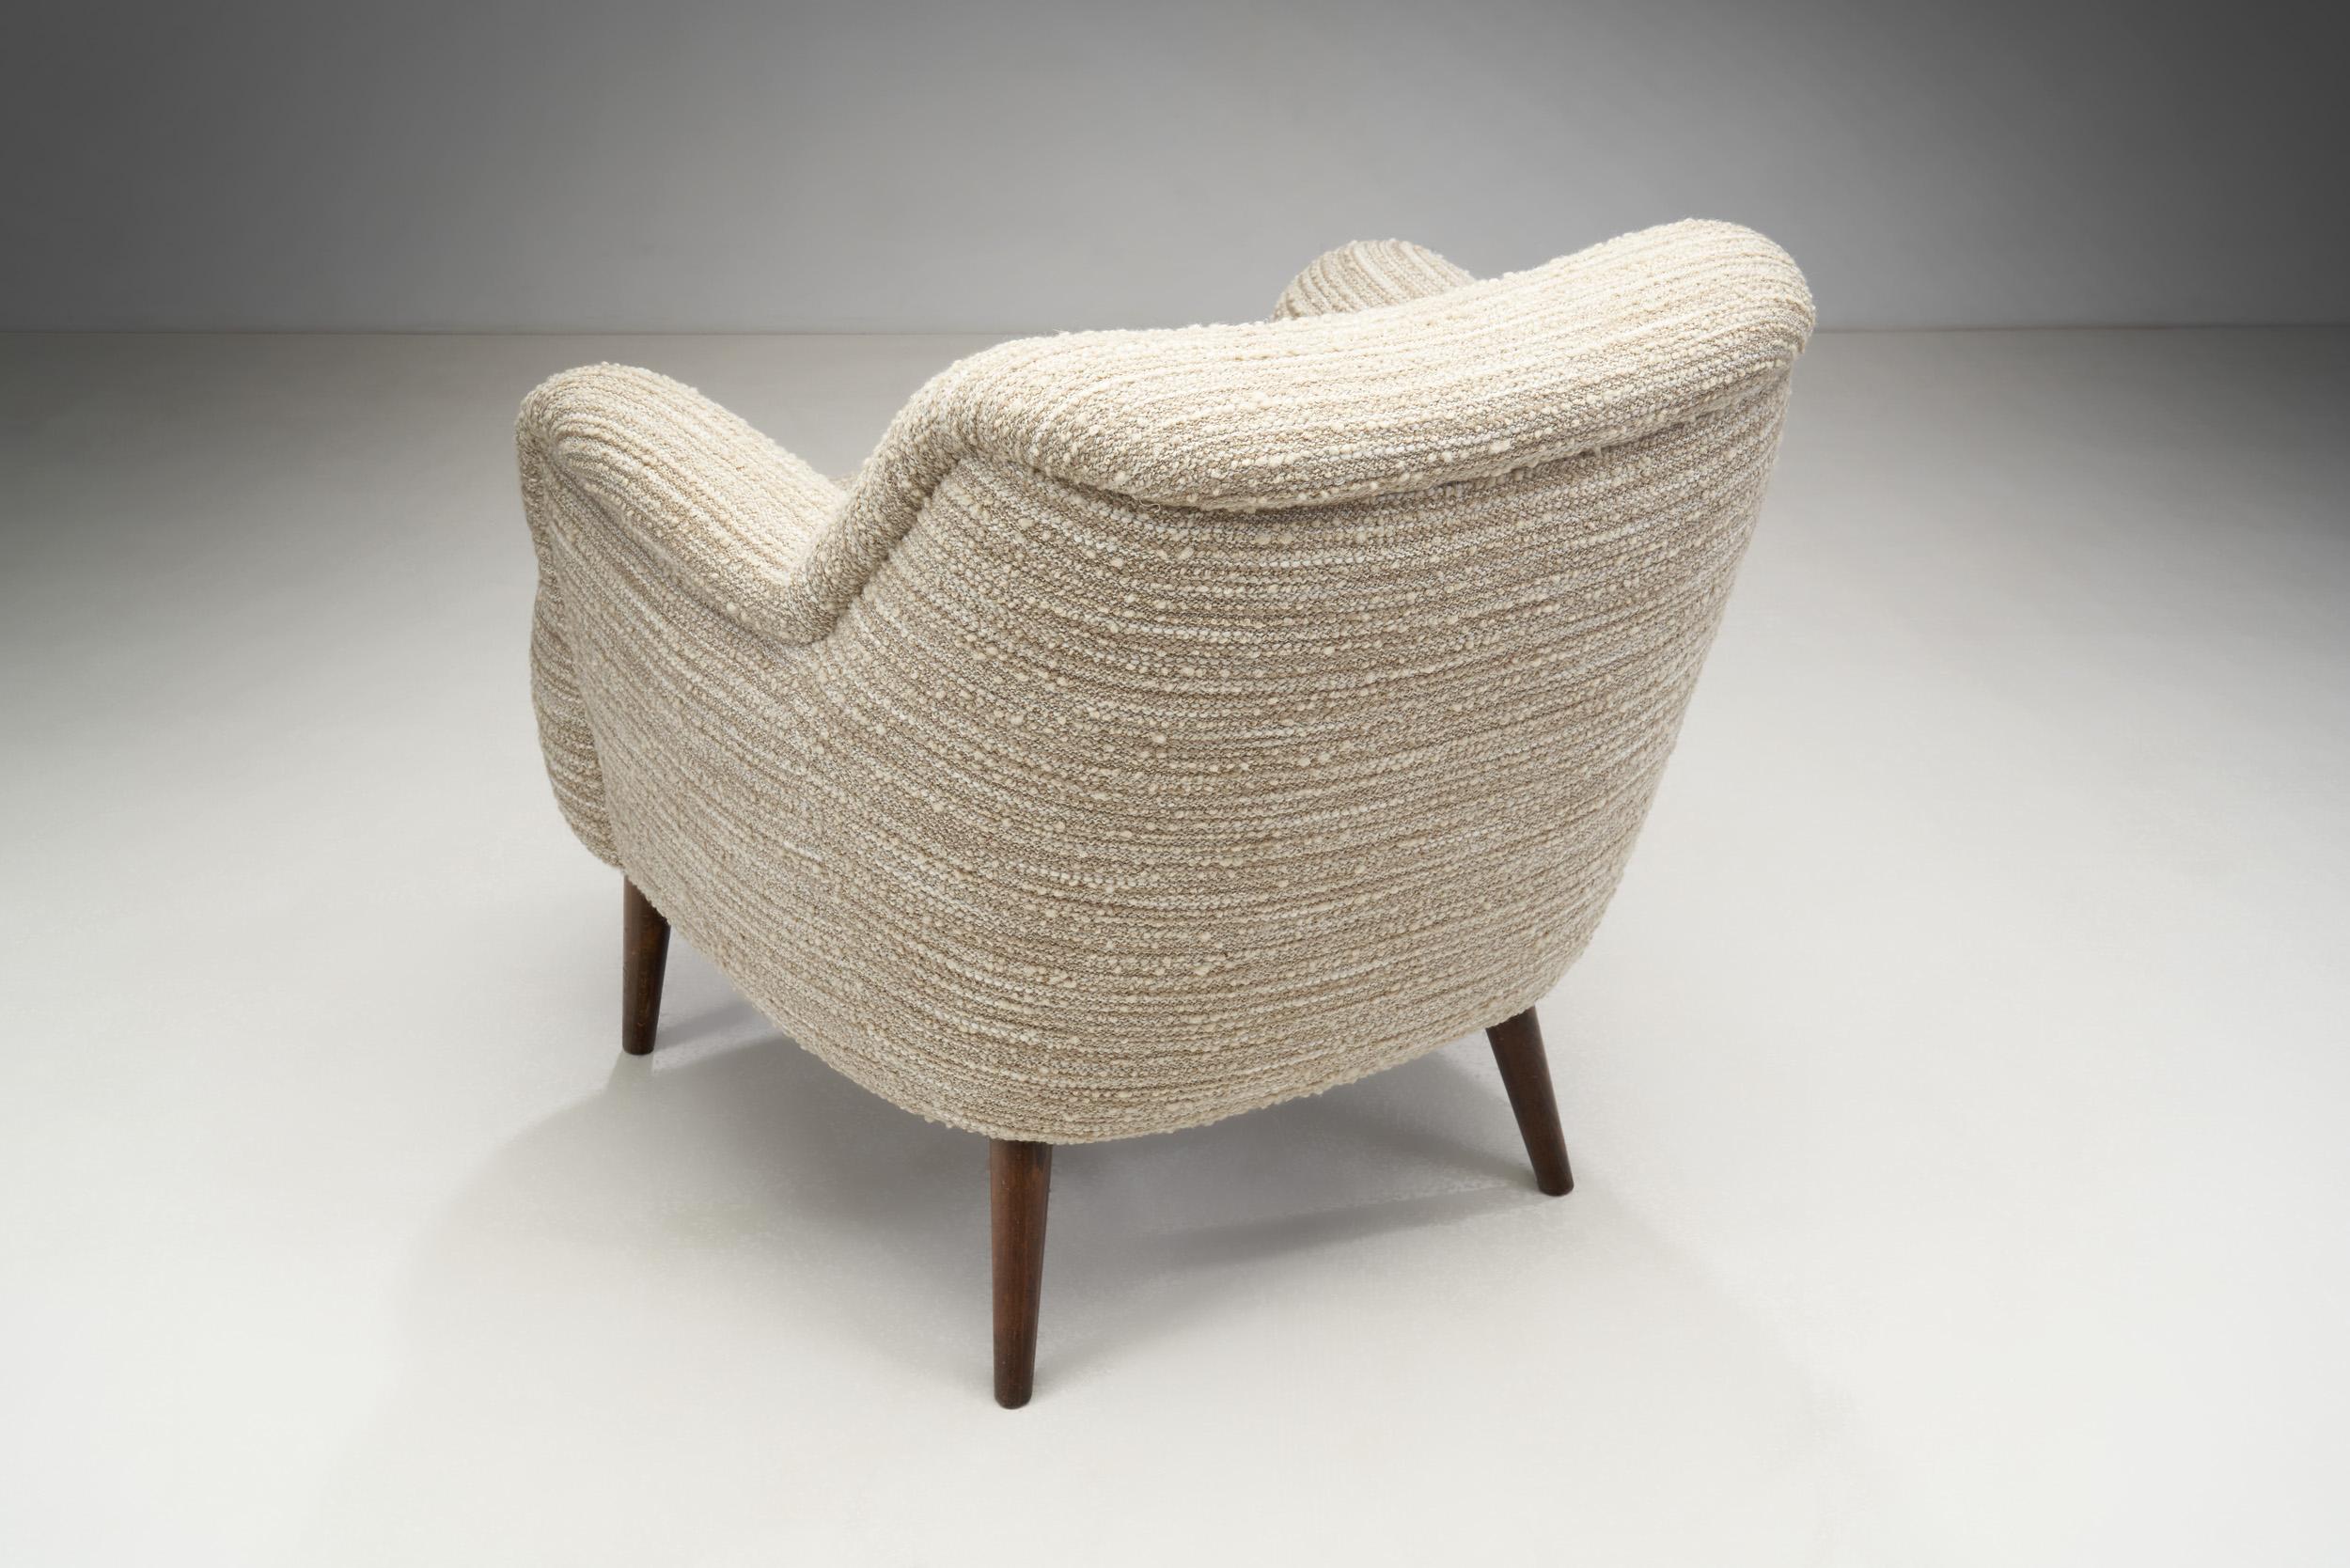 European Mid-Century Modern Armchairs in Bouclé, Europe, ca 1950s For Sale 1